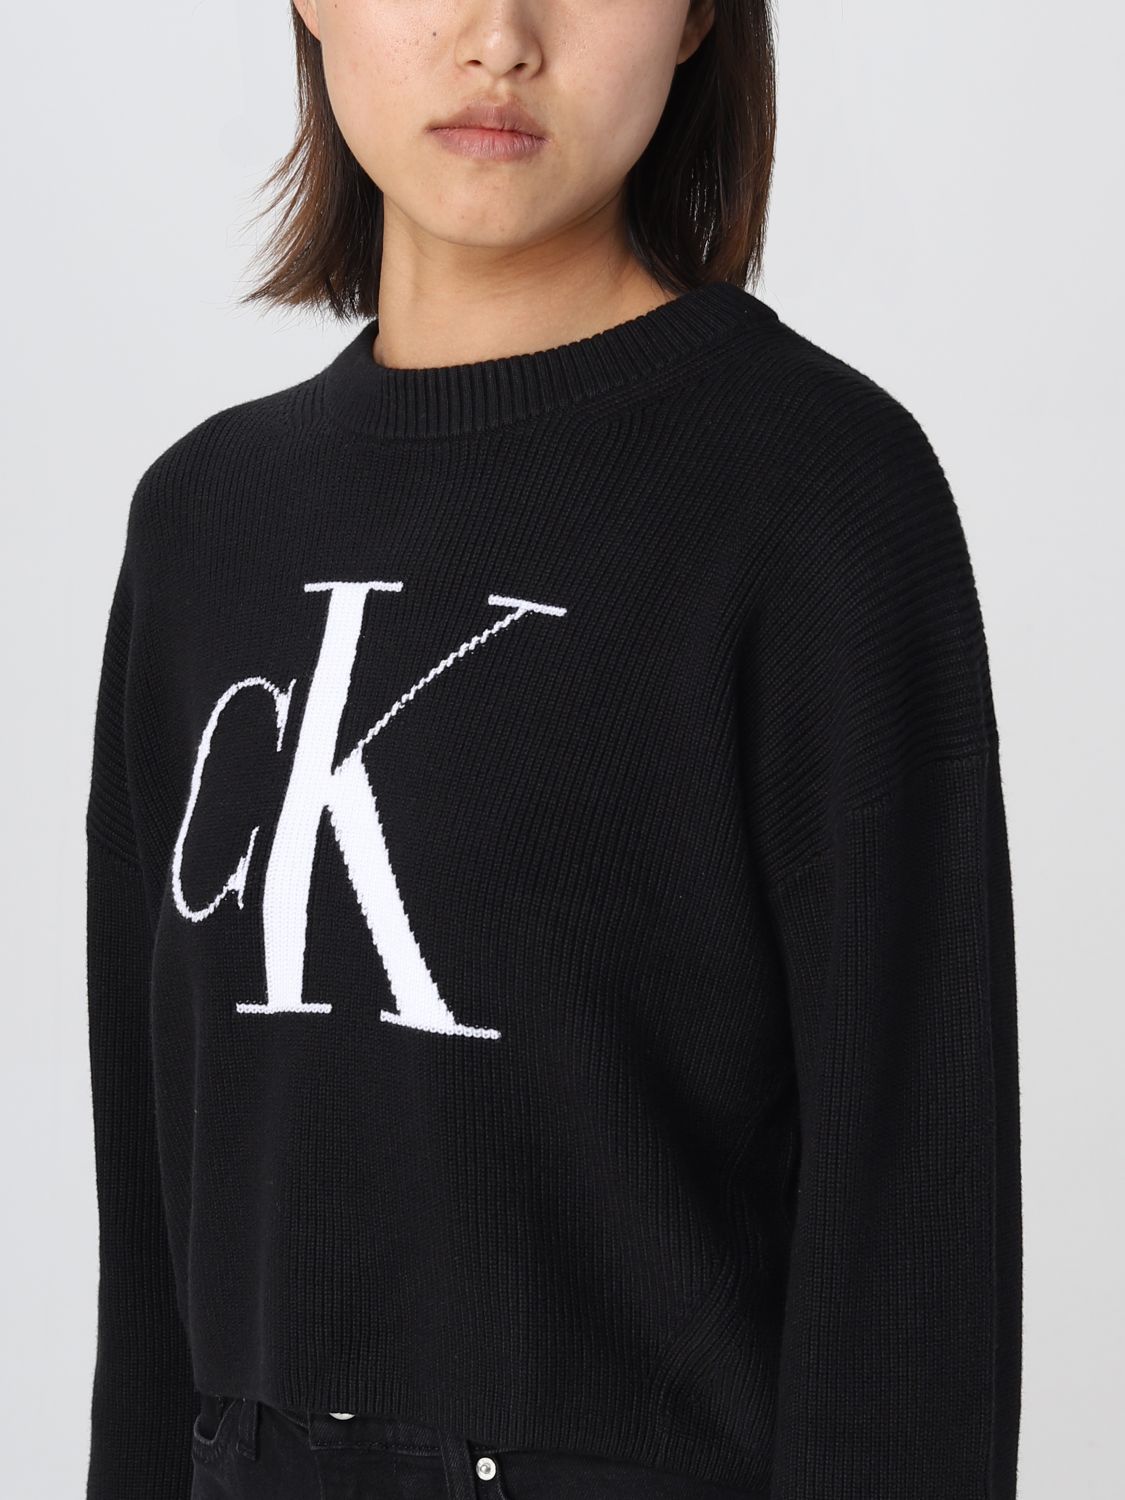 CALVIN KLEIN JEANS: sweater for woman - Black | Calvin Klein Jeans sweater  J20J221132 online on 